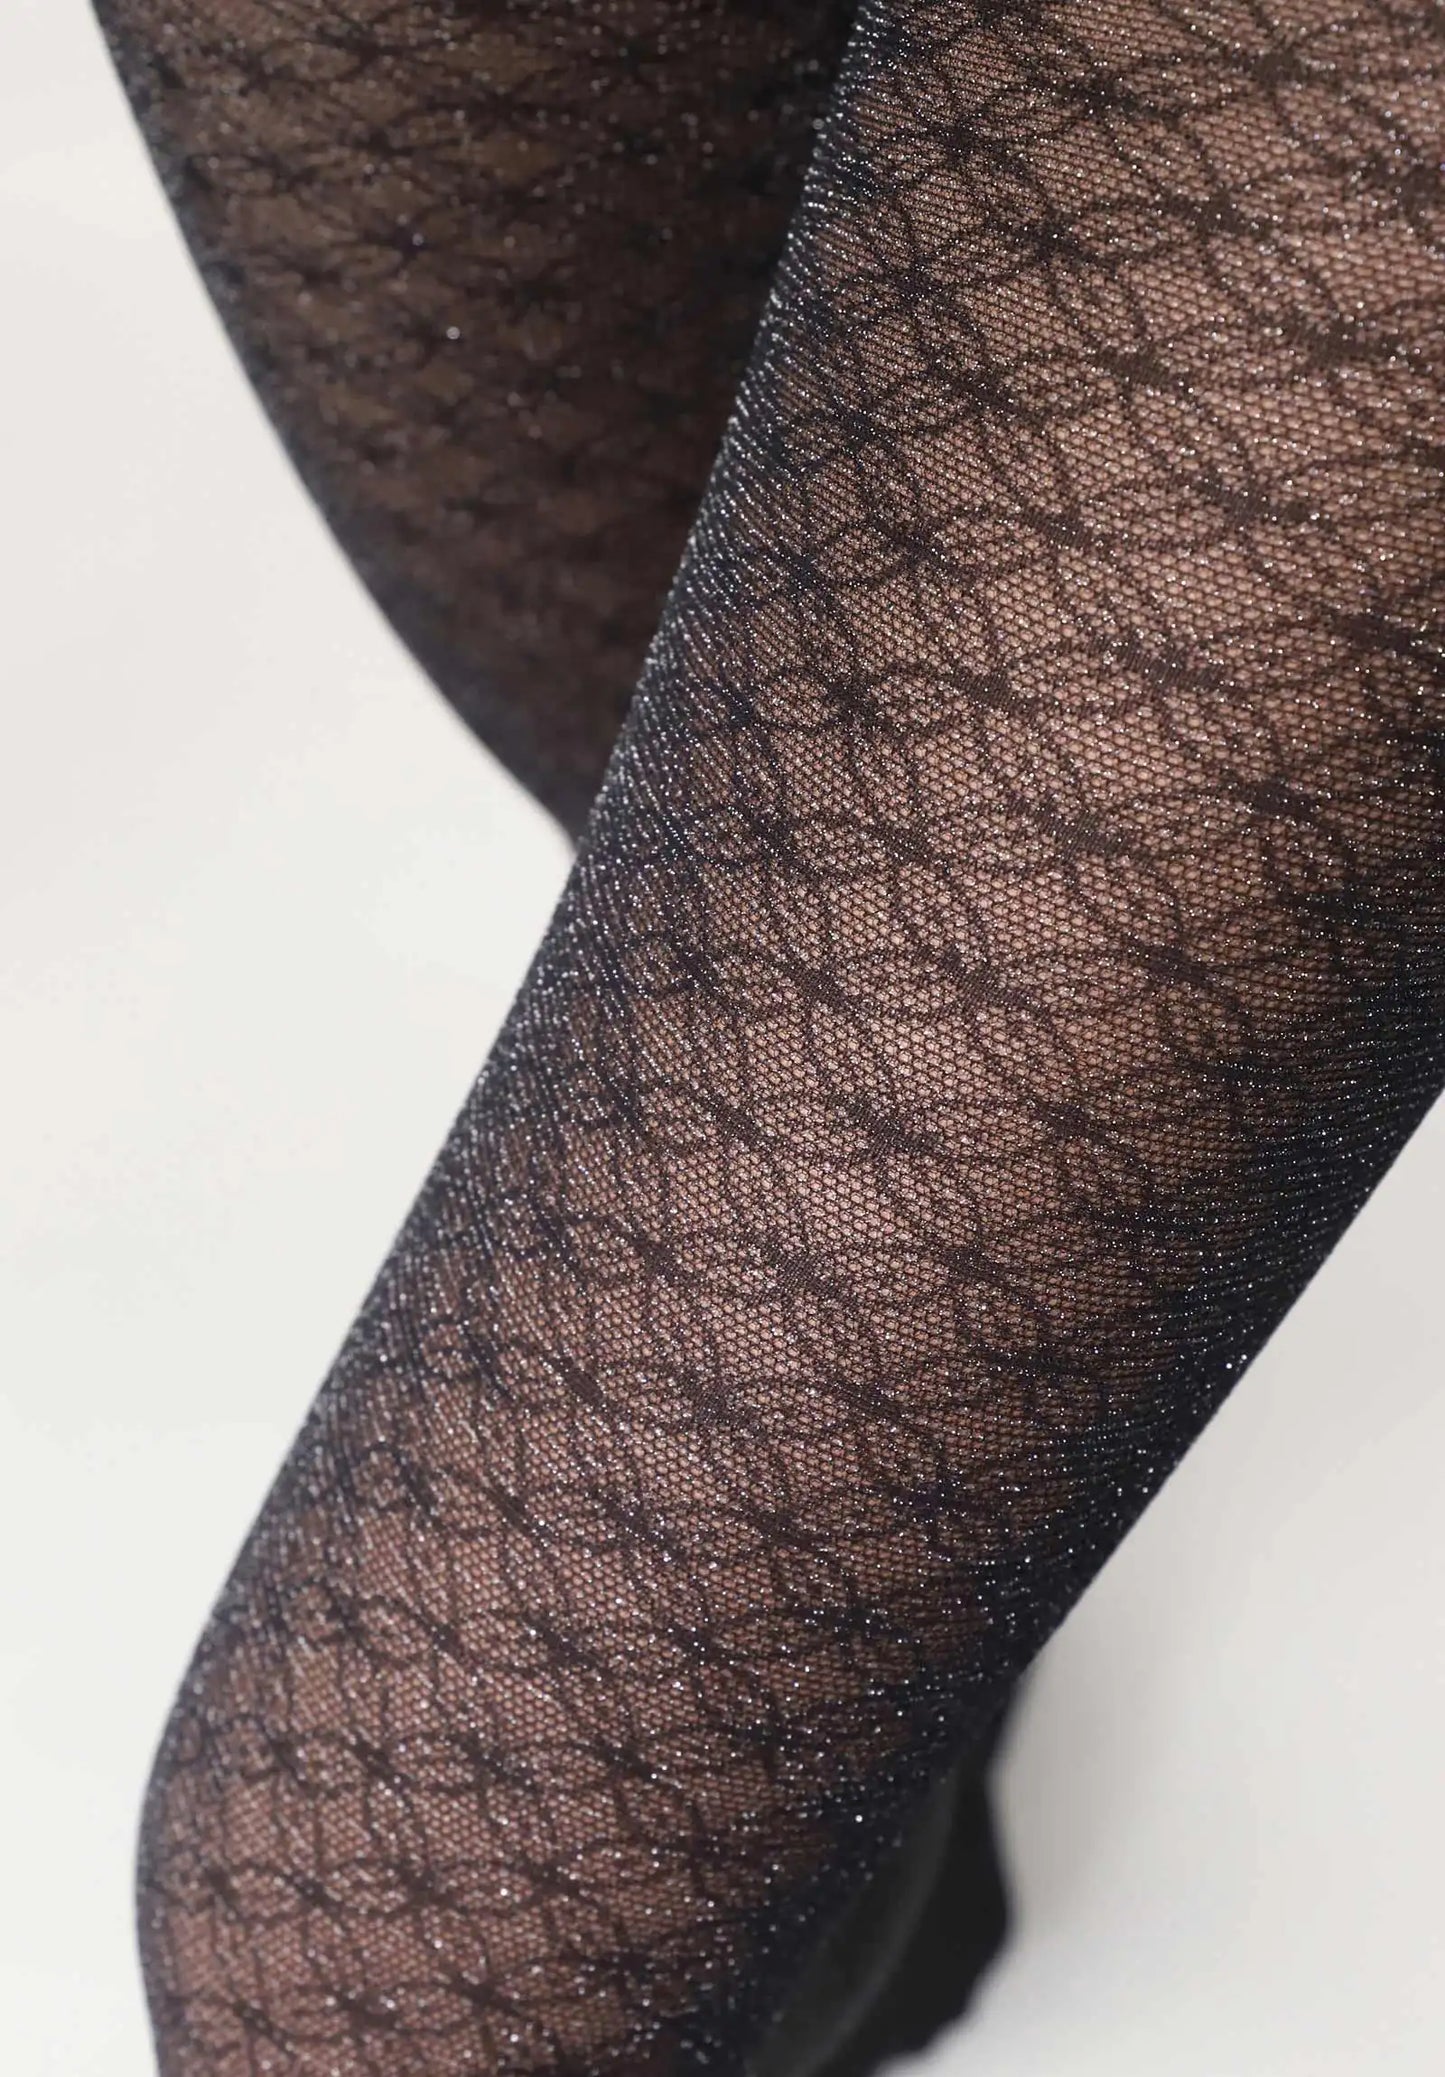 Oroblù Sparkly Lace Collant - Black semi sheer fashion tights with an all over delicate geometric lace style pattern in silver lurex